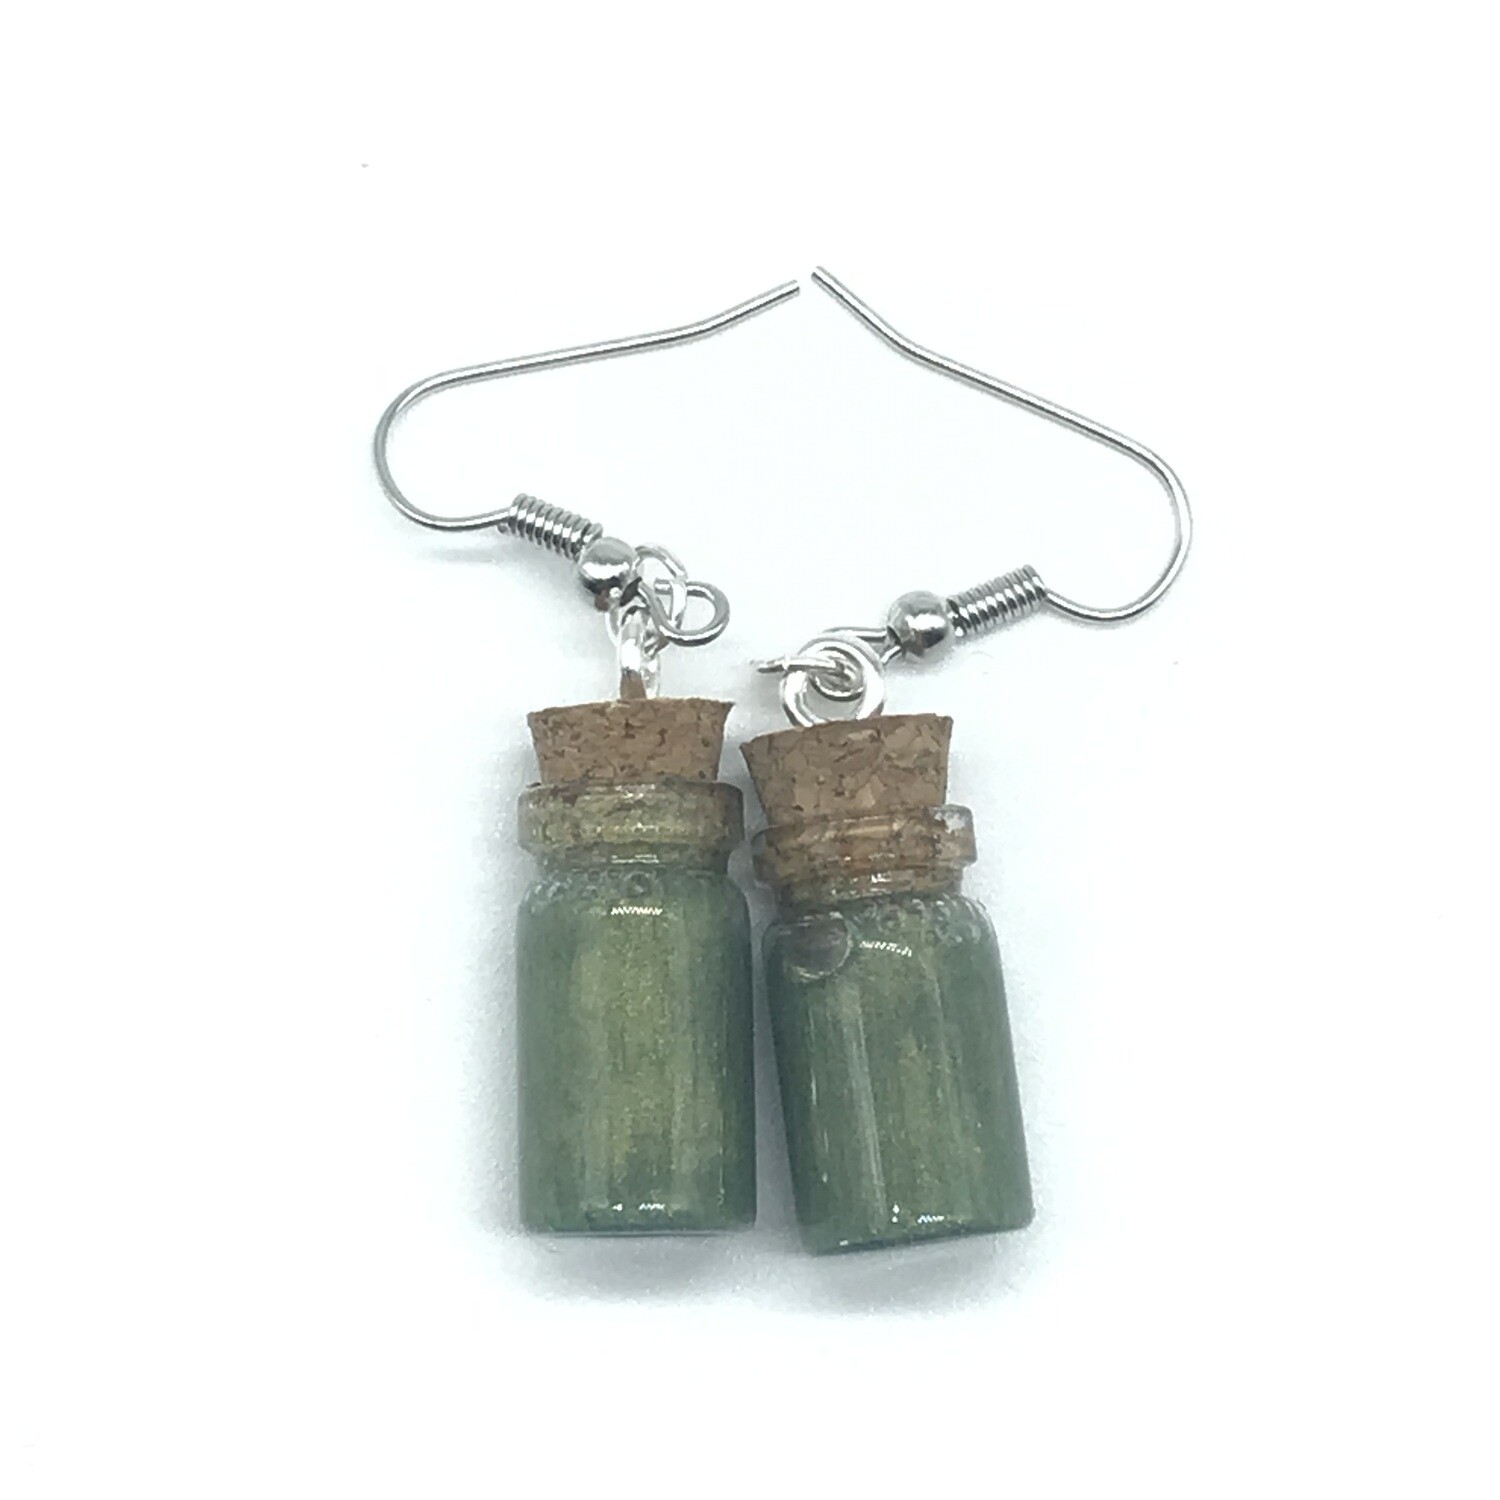 Potion Earrings - Olive green, small cylinder bottle